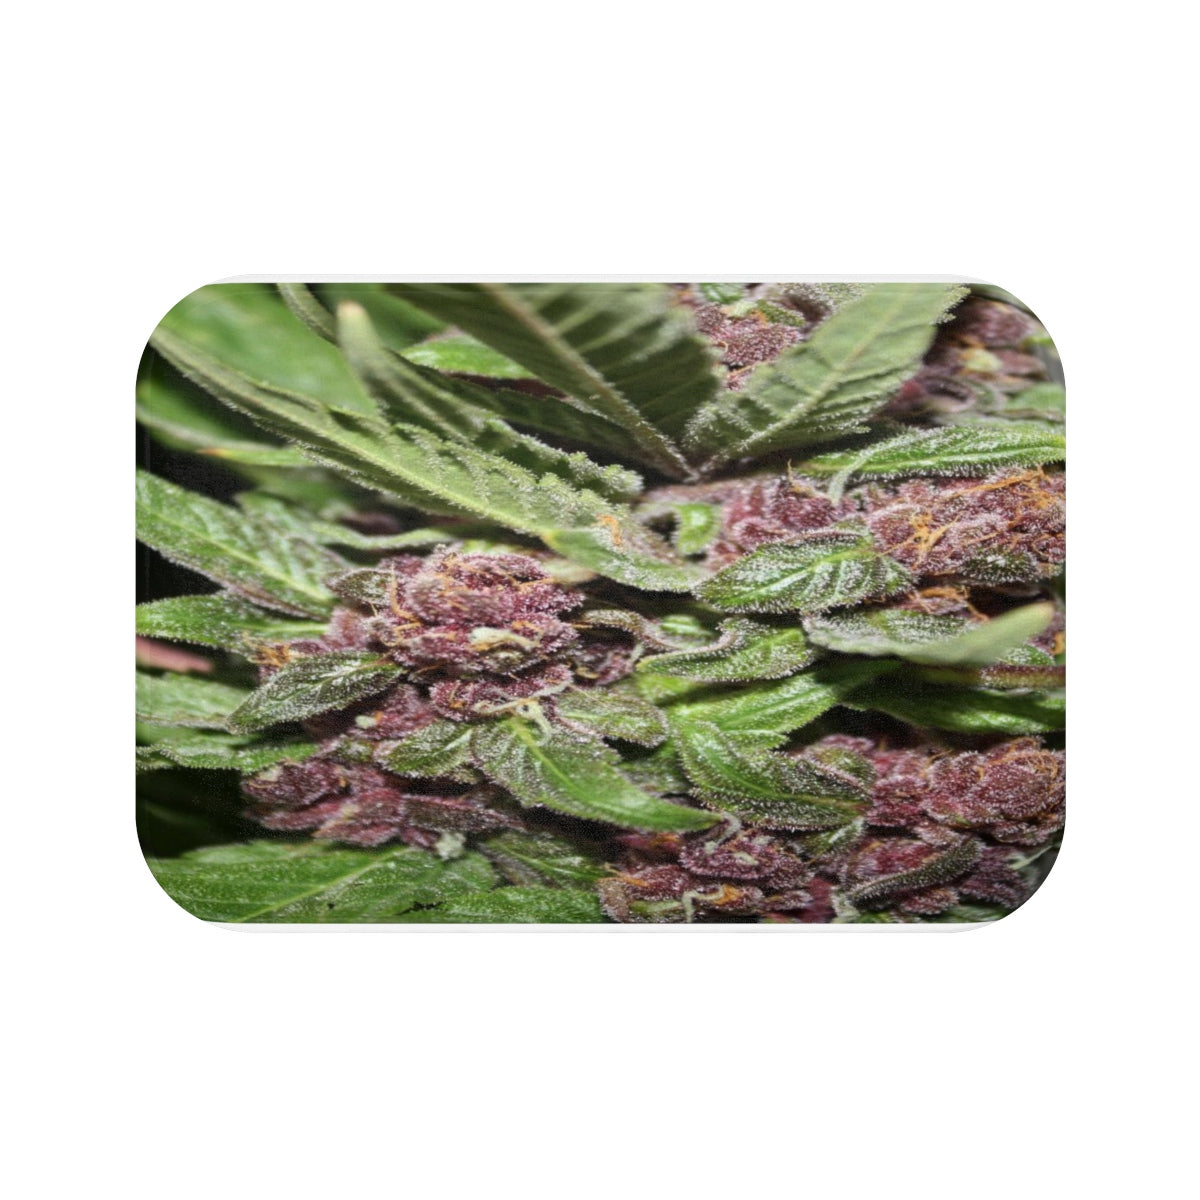 Cannabis Bud Custom Designed Shower Mat.  A Unique Cannabis Gift For Friends & Family. Cannabis Decor For Your Home.